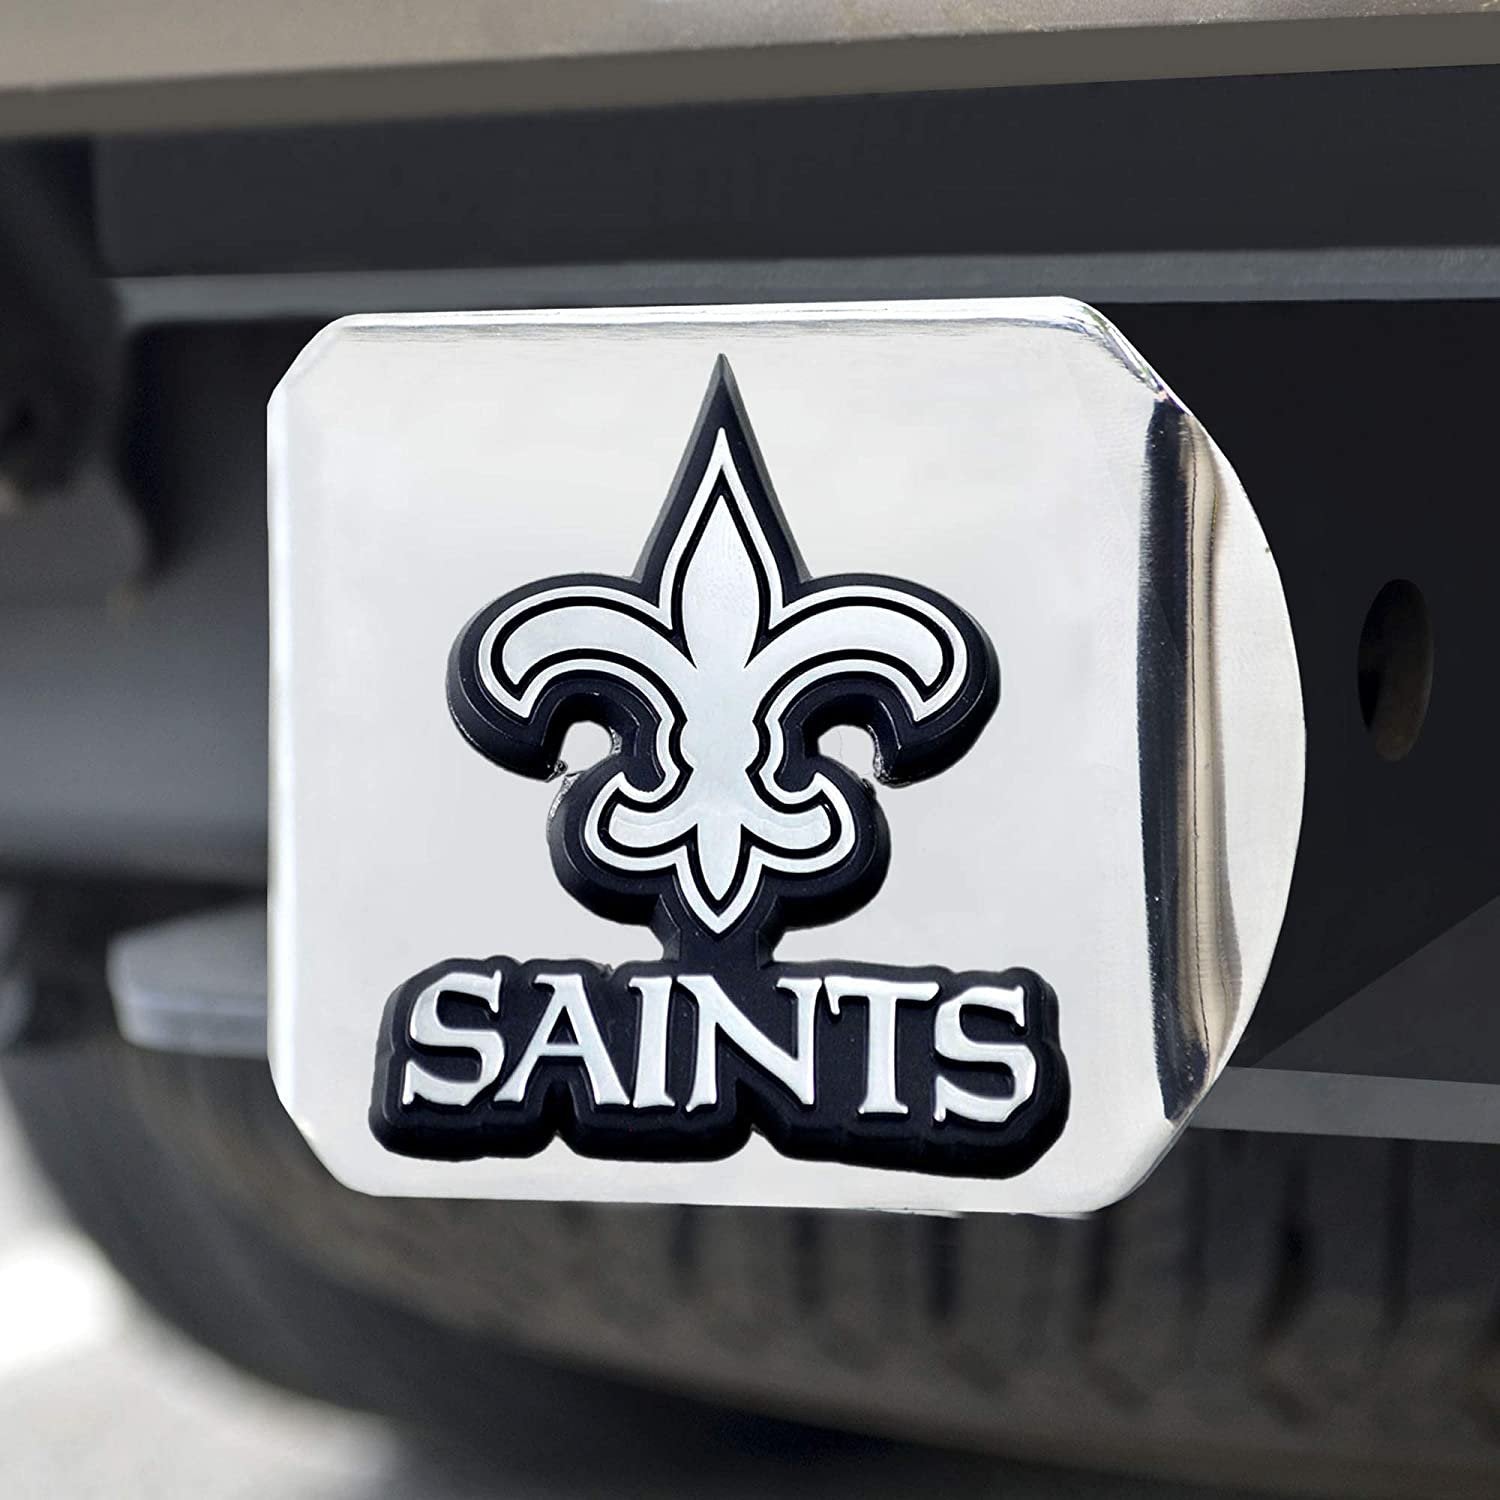 New Orleans Saints Hitch Cover Solid Metal with Raised Chrome Metal Emblem 2" Square Type III